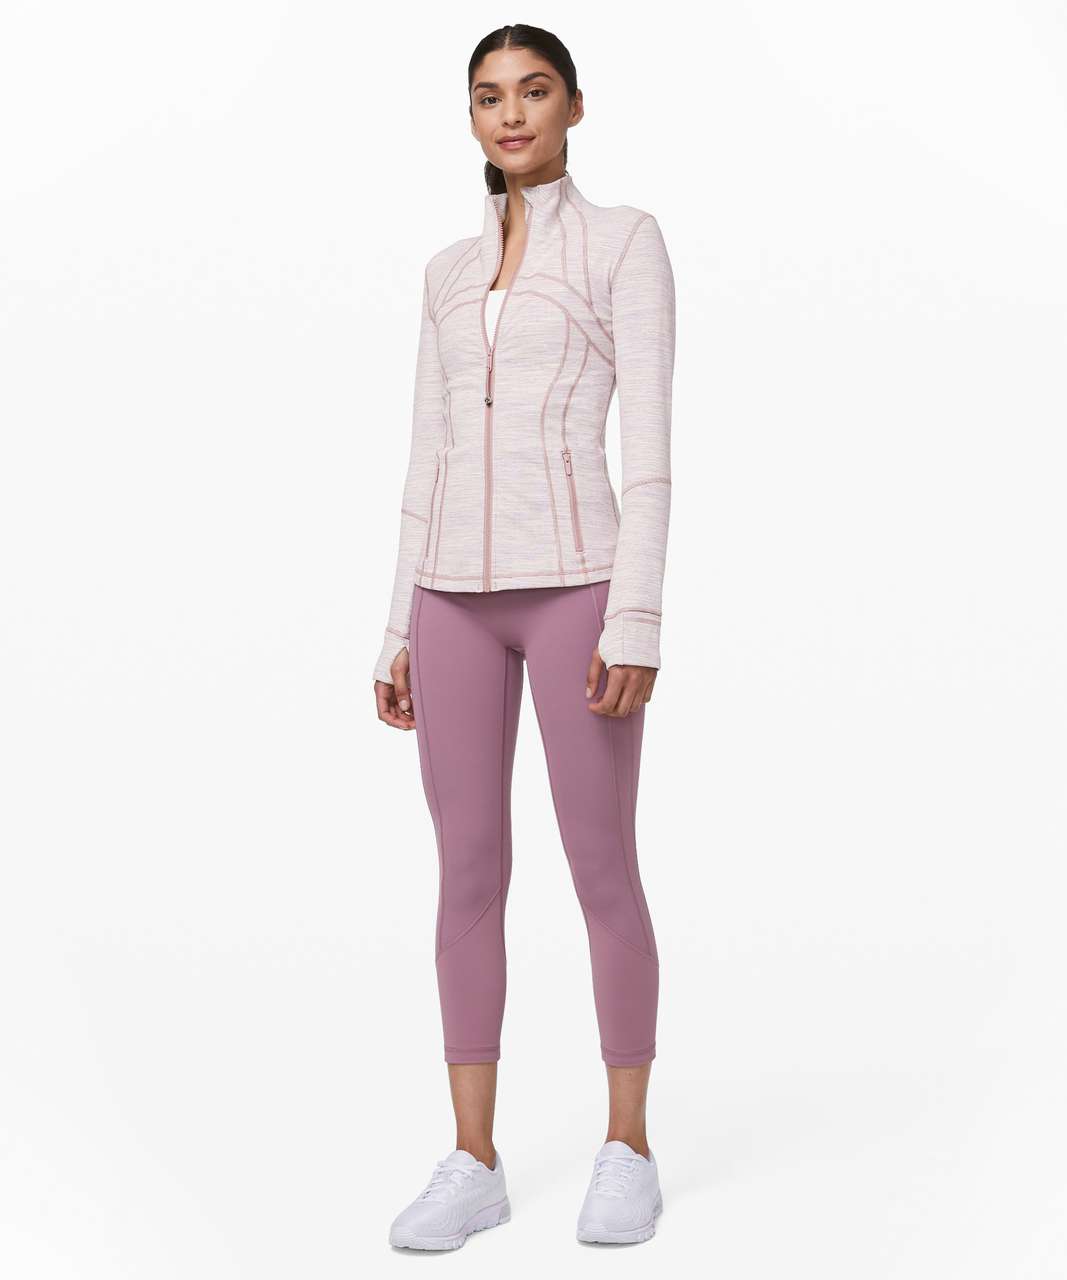 Lululemon Define Jacket - Wee Are From Space Pink Bliss Vintage Mauve